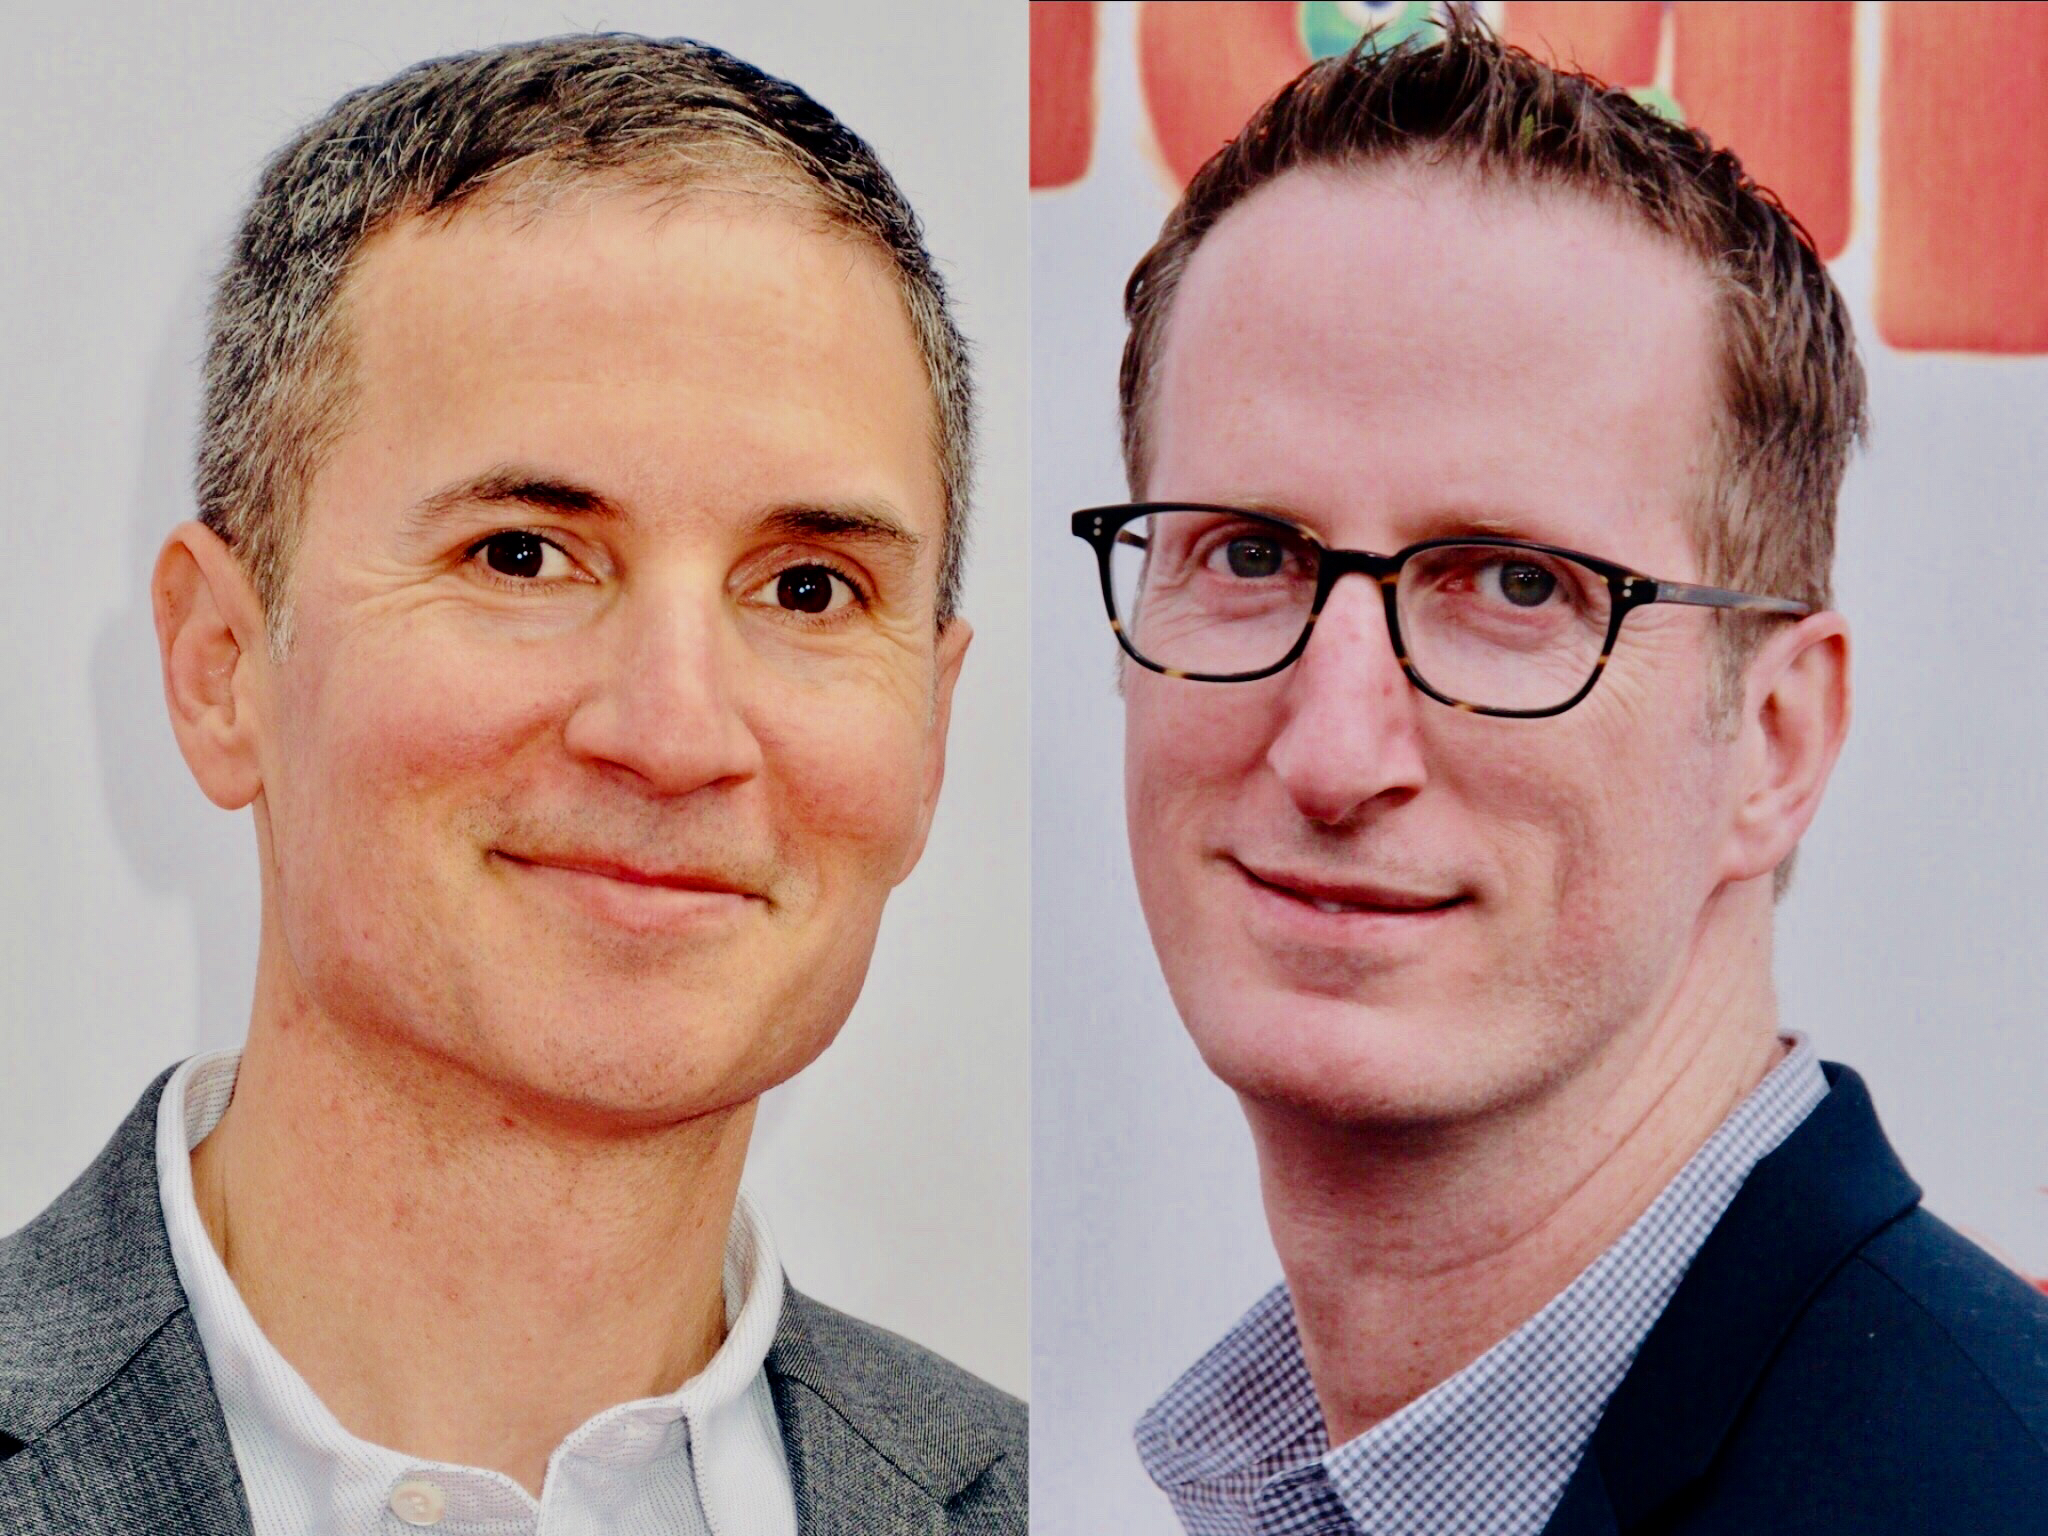 STX Boards Alibaba Pictures' 'Warriors